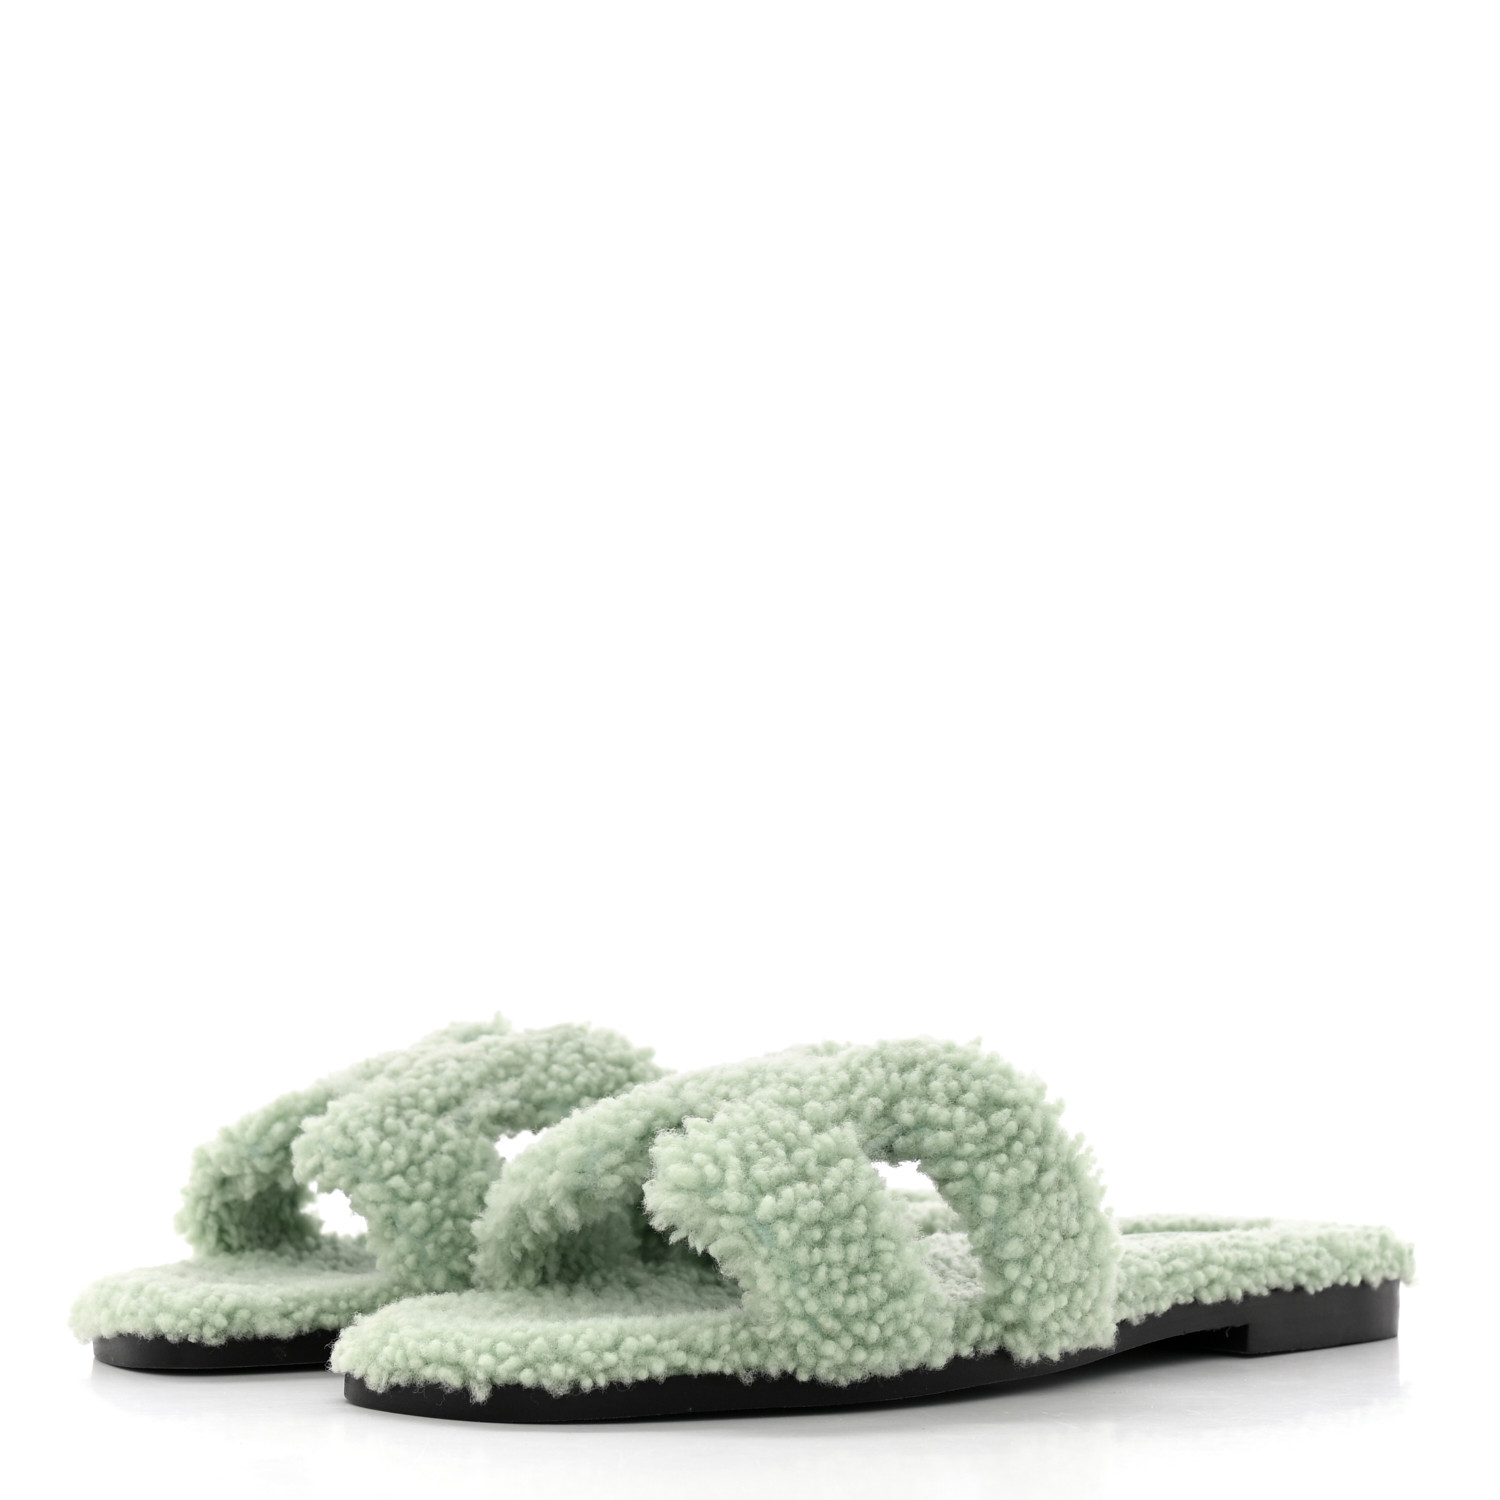 HERMES Woolskin Oran Sandals in the color Vert D’eau by FASHIONPHILE